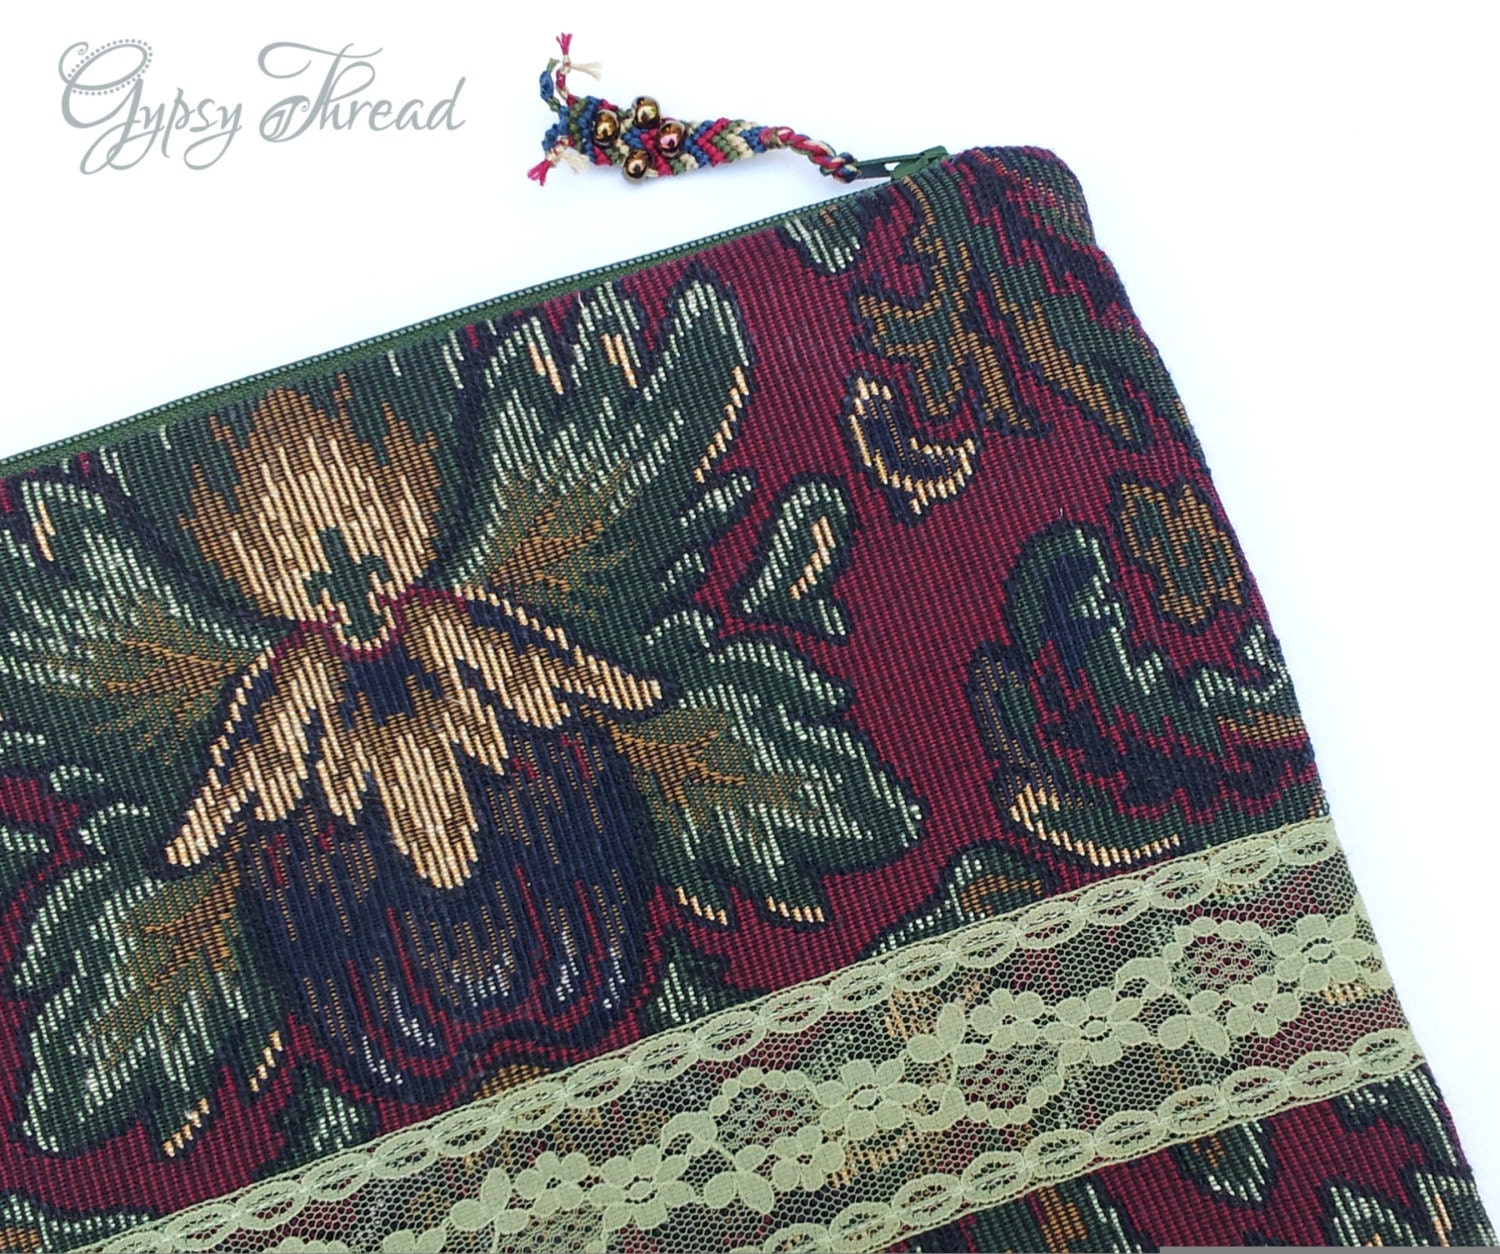 Vintage Royal Colors Brocade Tapestry and Lace iPad Cover - GypsyThread